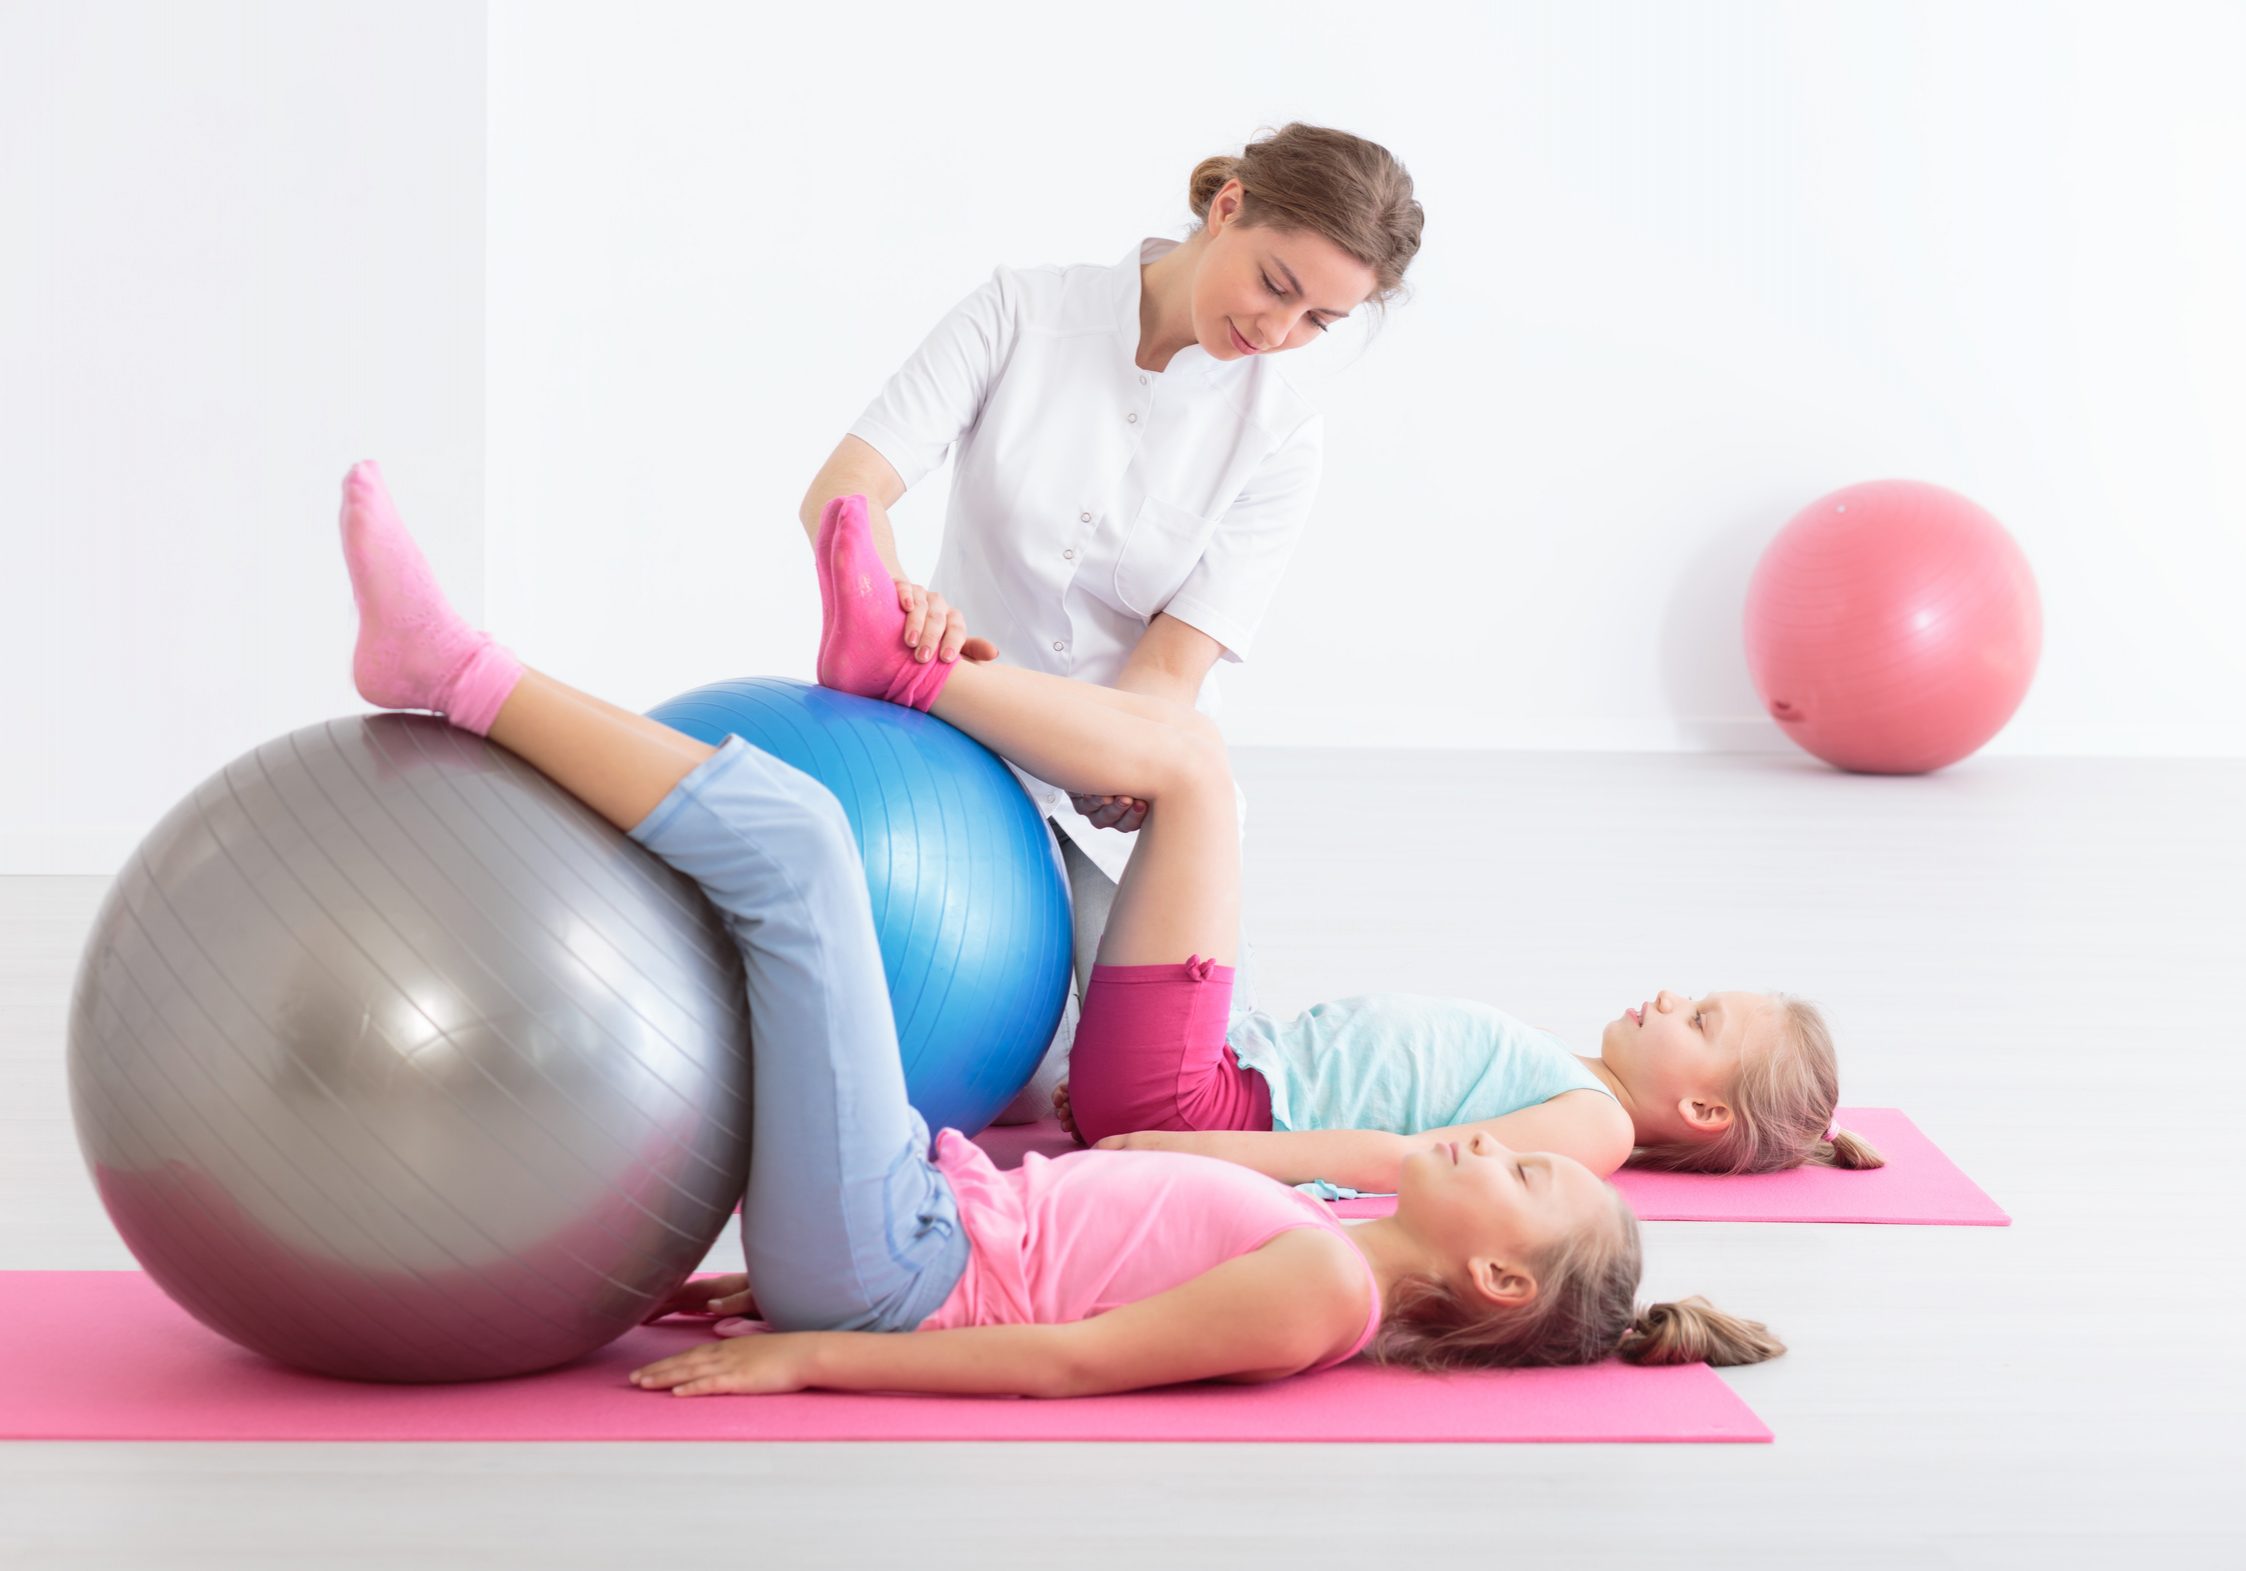 Two school girls lying on exercise mats exercising their legs on balls, accompanied by a physical therapist